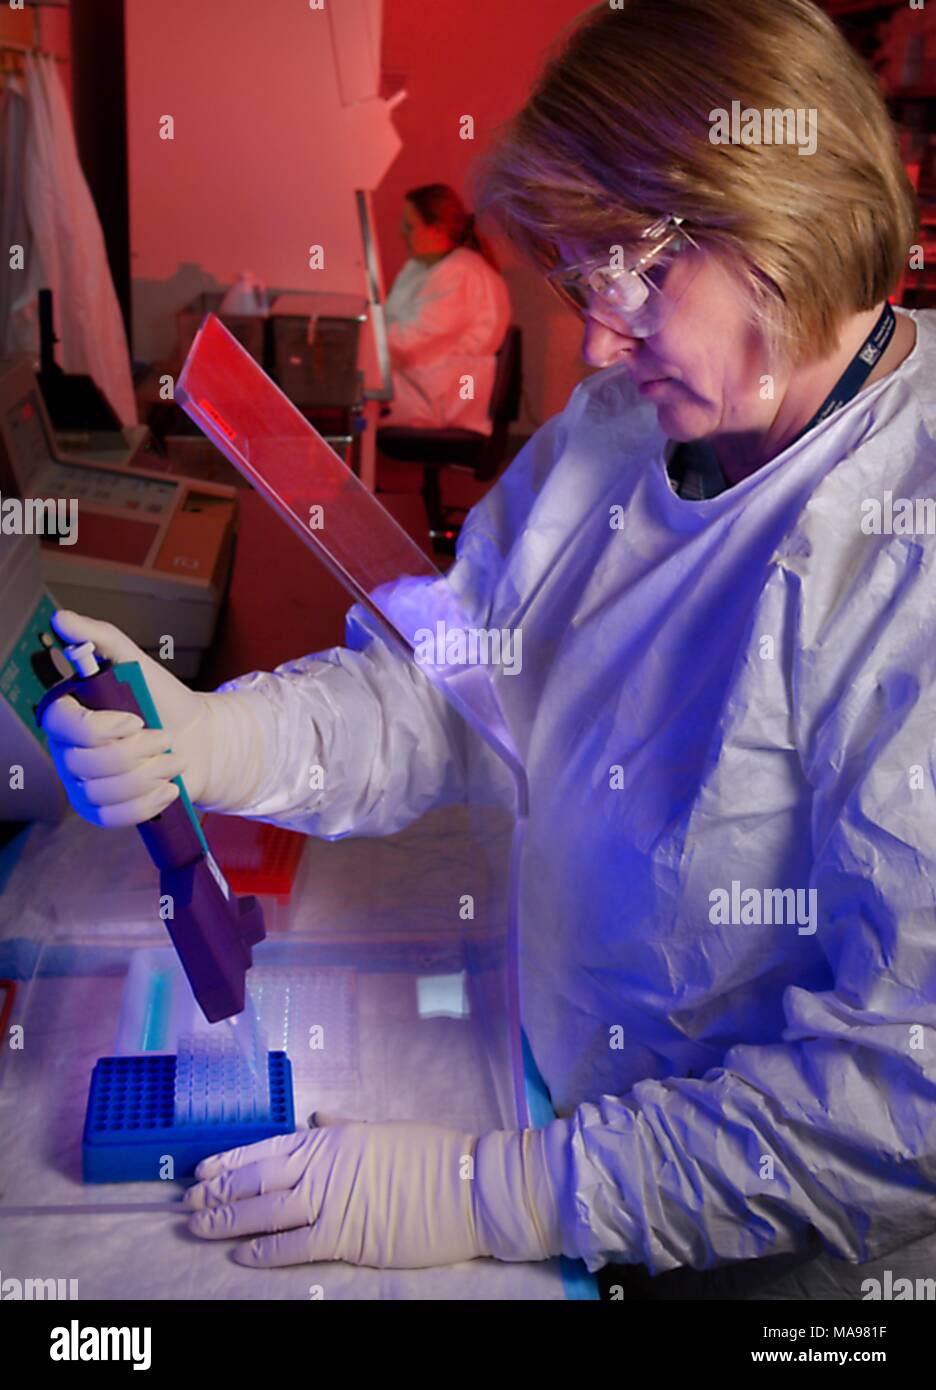 Photograph of the CDC microbiologist Susan Phillips working inside a laboratory with HIV samples, wearing protective gear, developing methods for rapid detection of HIV, and biologist Trudy Dobbs in the background, working in a Biological Safety Cabinet, 2007. Image courtesy CDC/Hsi Liu, James Gathany. () Stock Photo